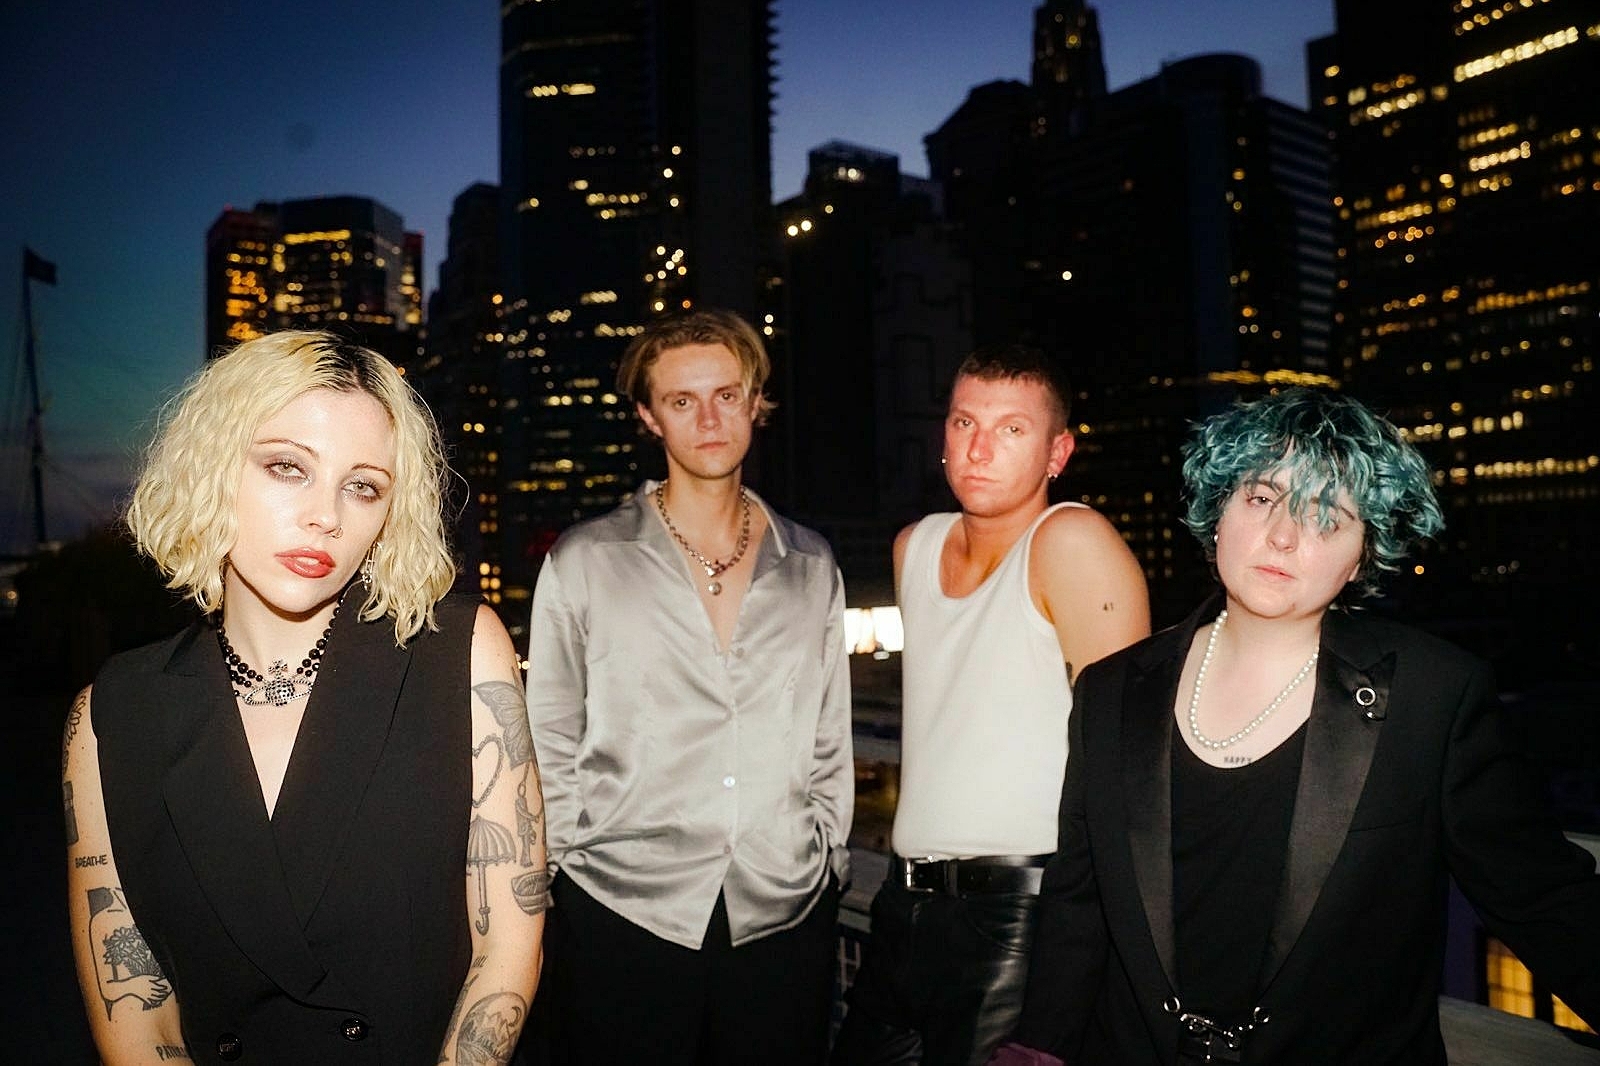 Pale Waves release new track 'The Hard Way'